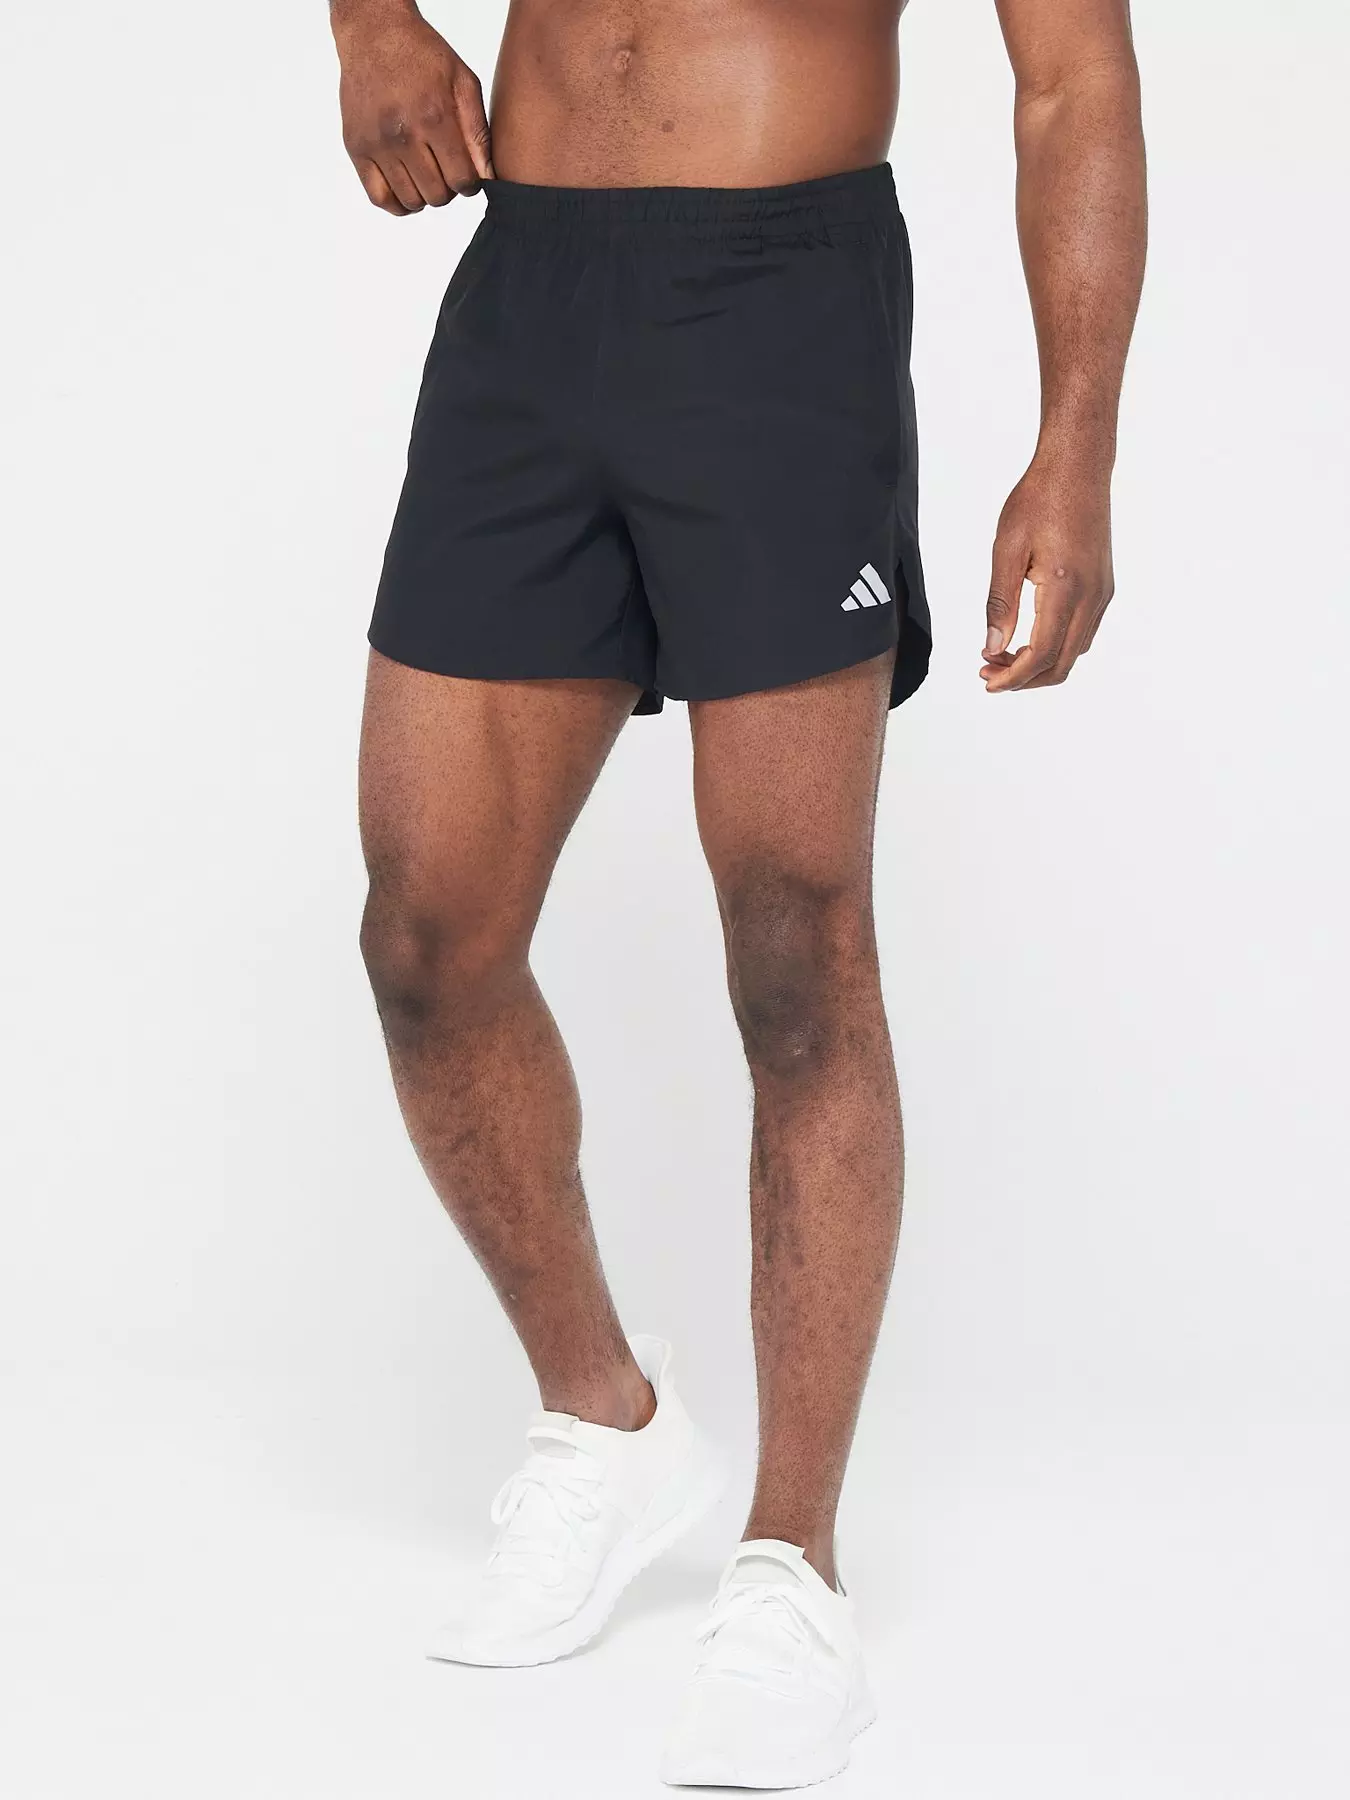 fvwitlyh Gymshark Shorts Men's 11 Inch Relaxed-Fit Stretch-Twill